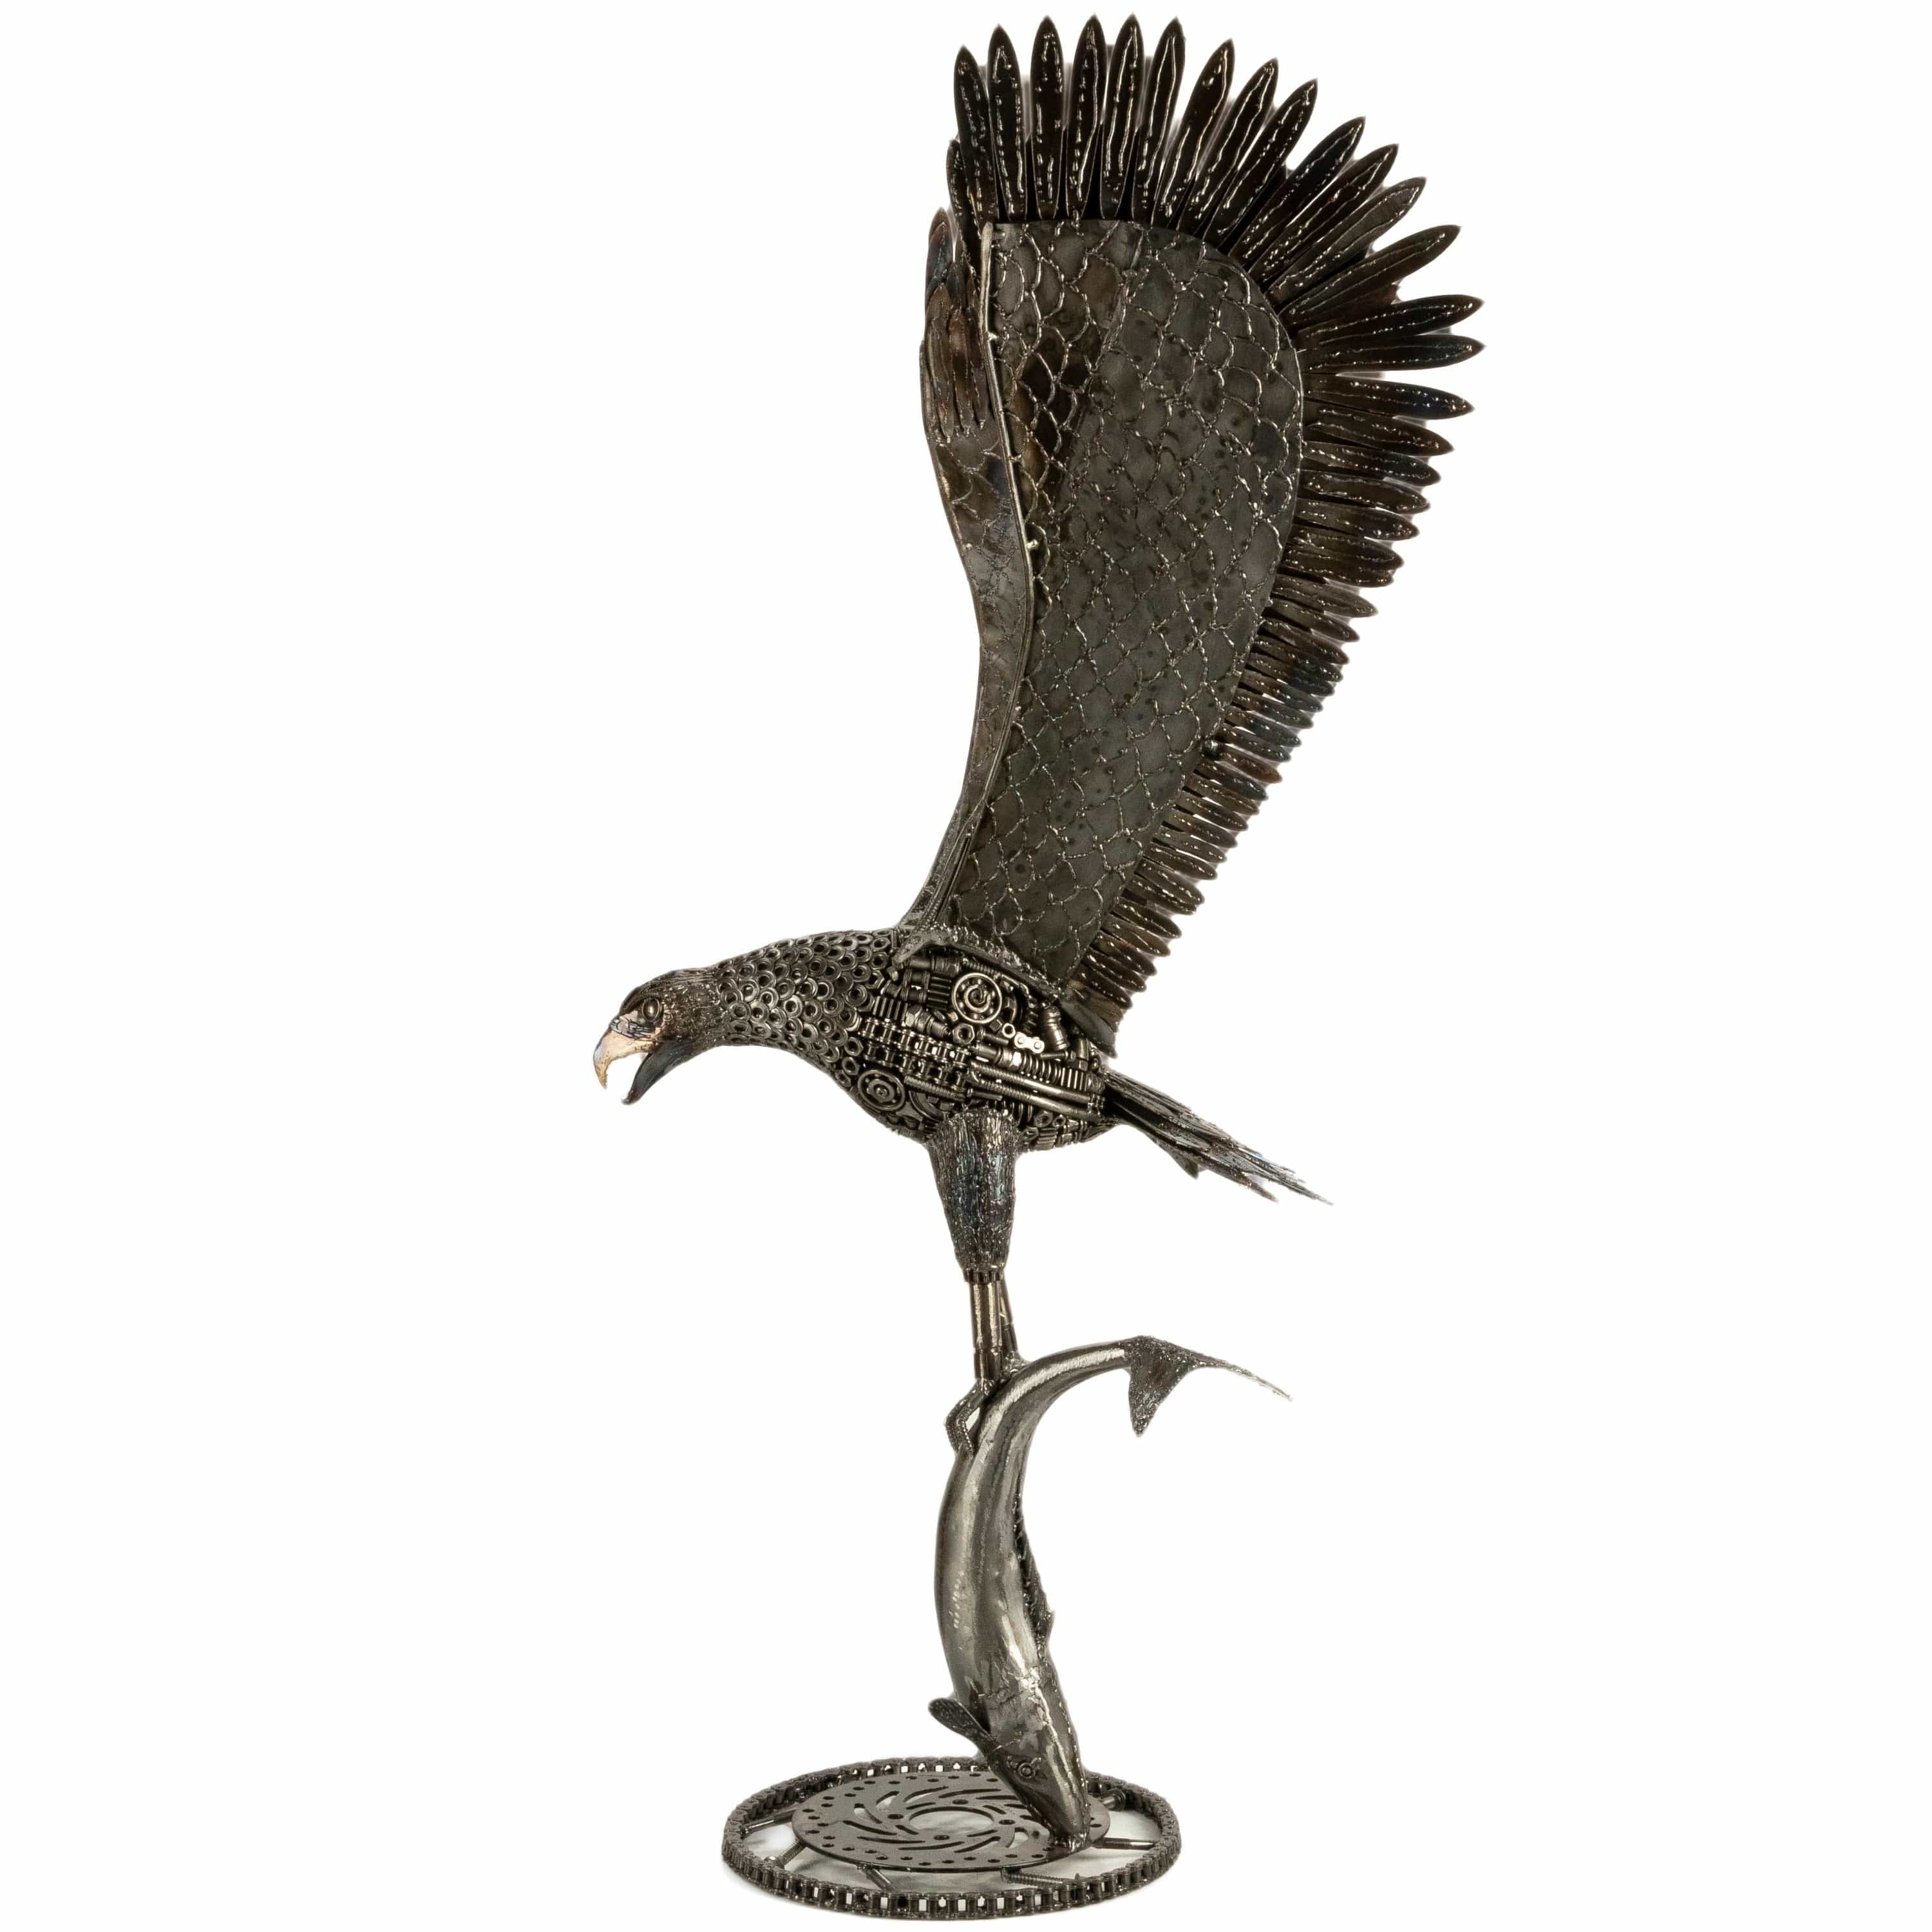 KALIFANO Recycled Metal Art 47" Eagle on the Hunt Recycled Metal Art Sculpture RMS-EAG54x120-PK